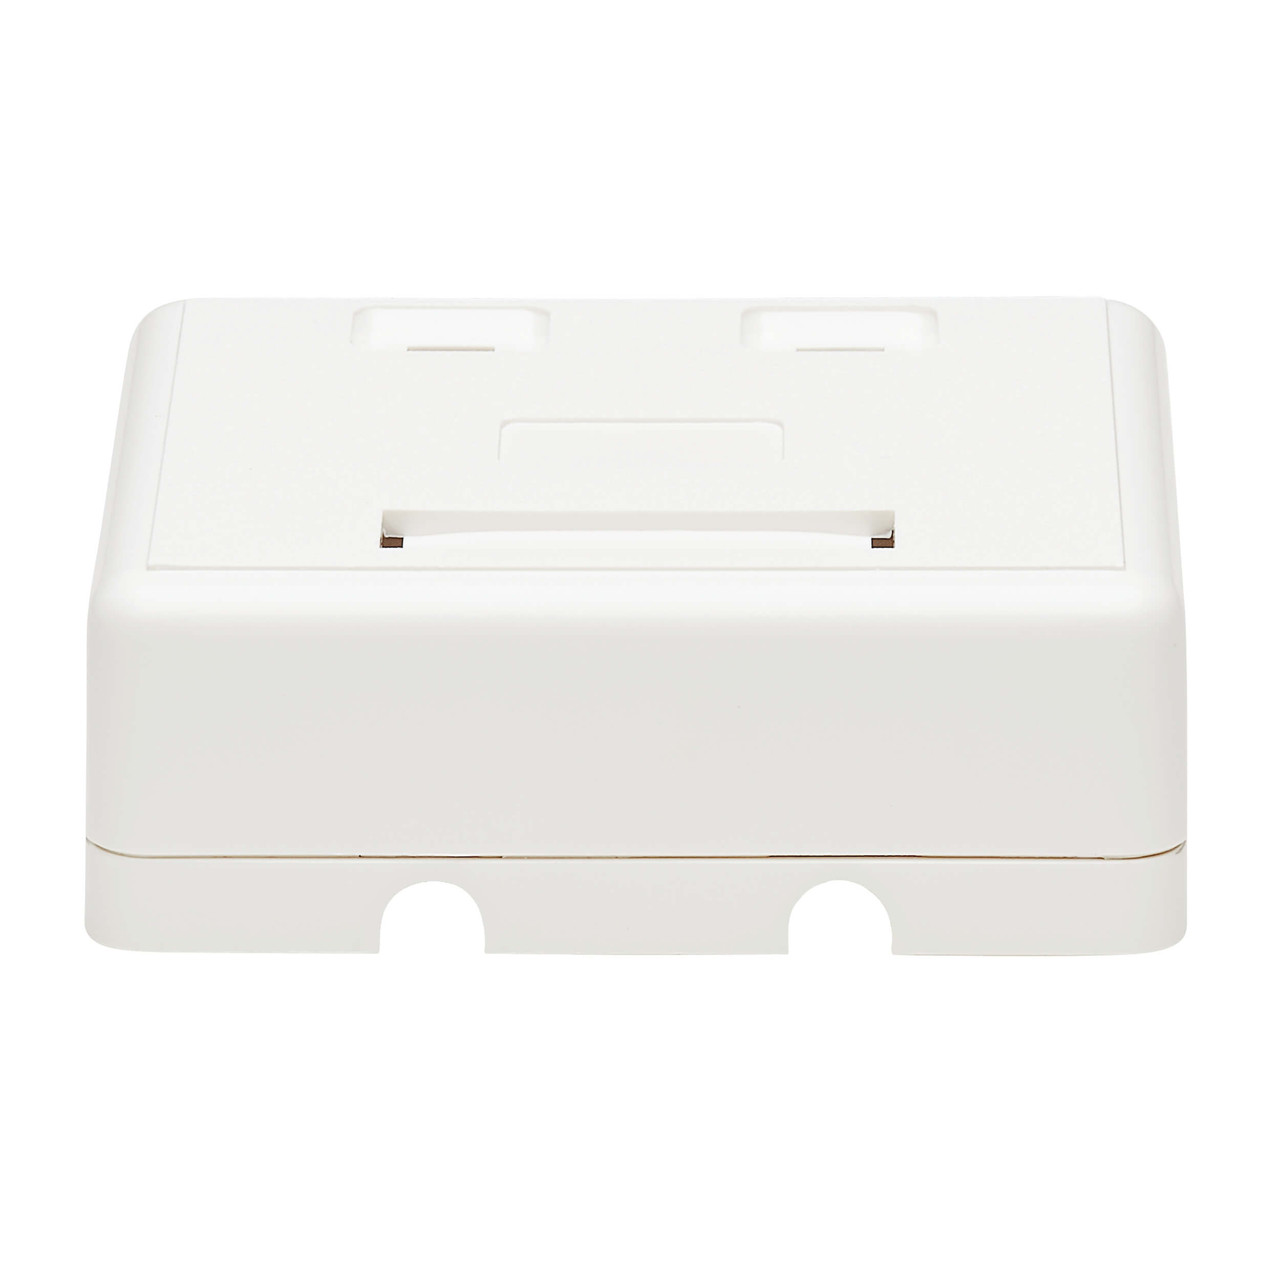 Vertical Cable Surface-Mount Box for Keystone Jacks - 2 Ports, White